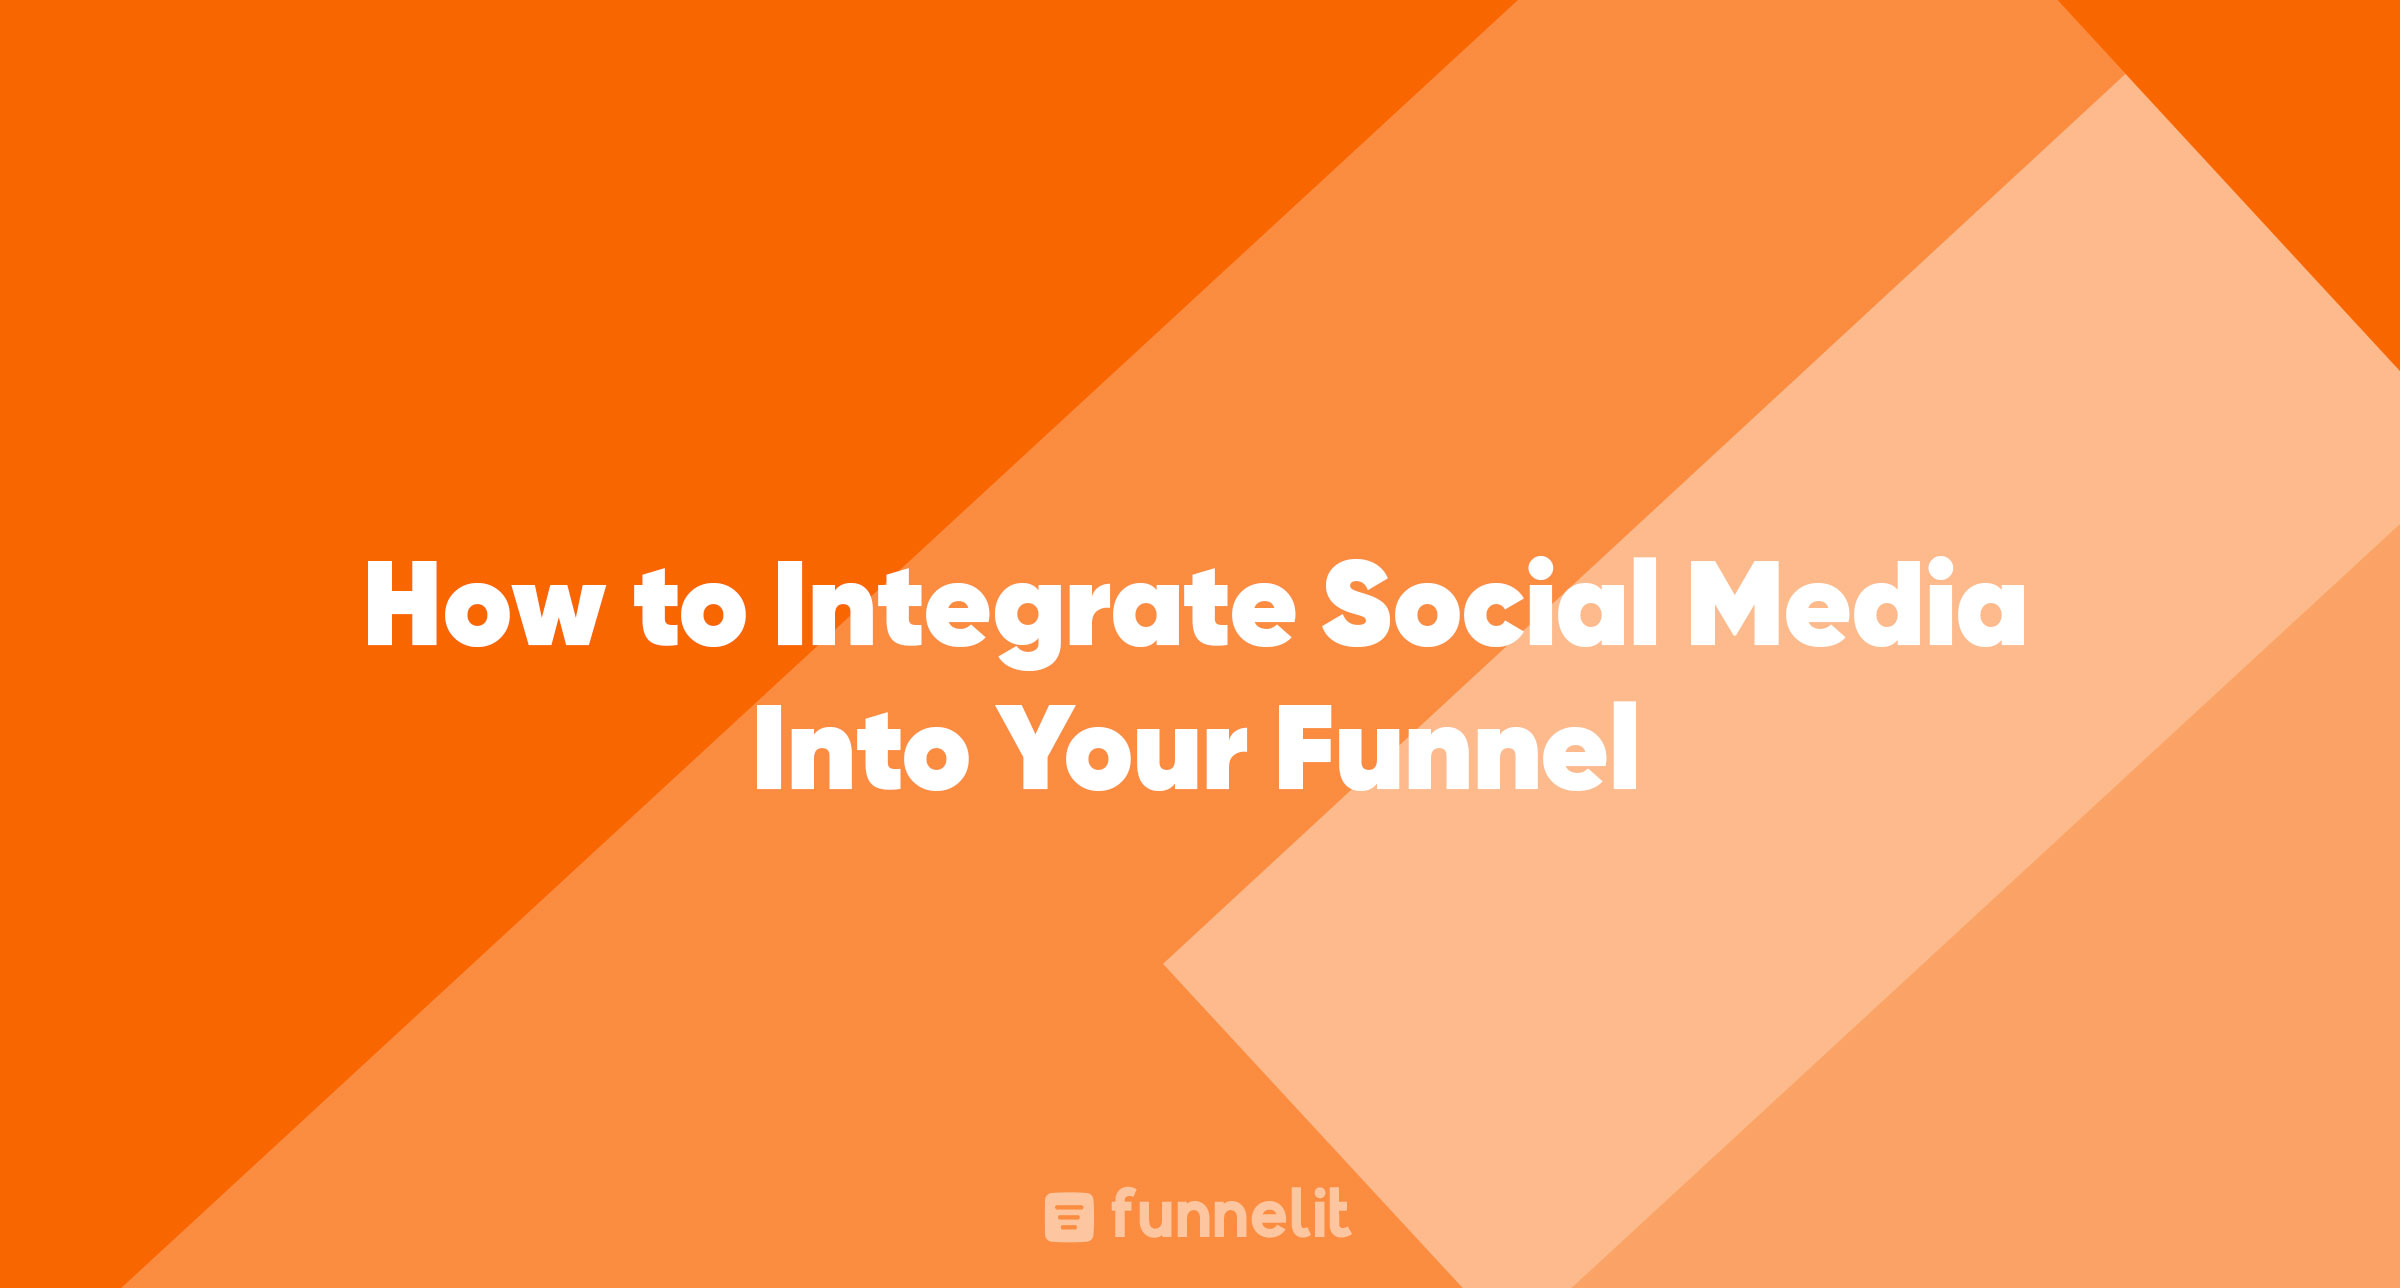 Article | How to Integrate Social Media Into Your Funnel